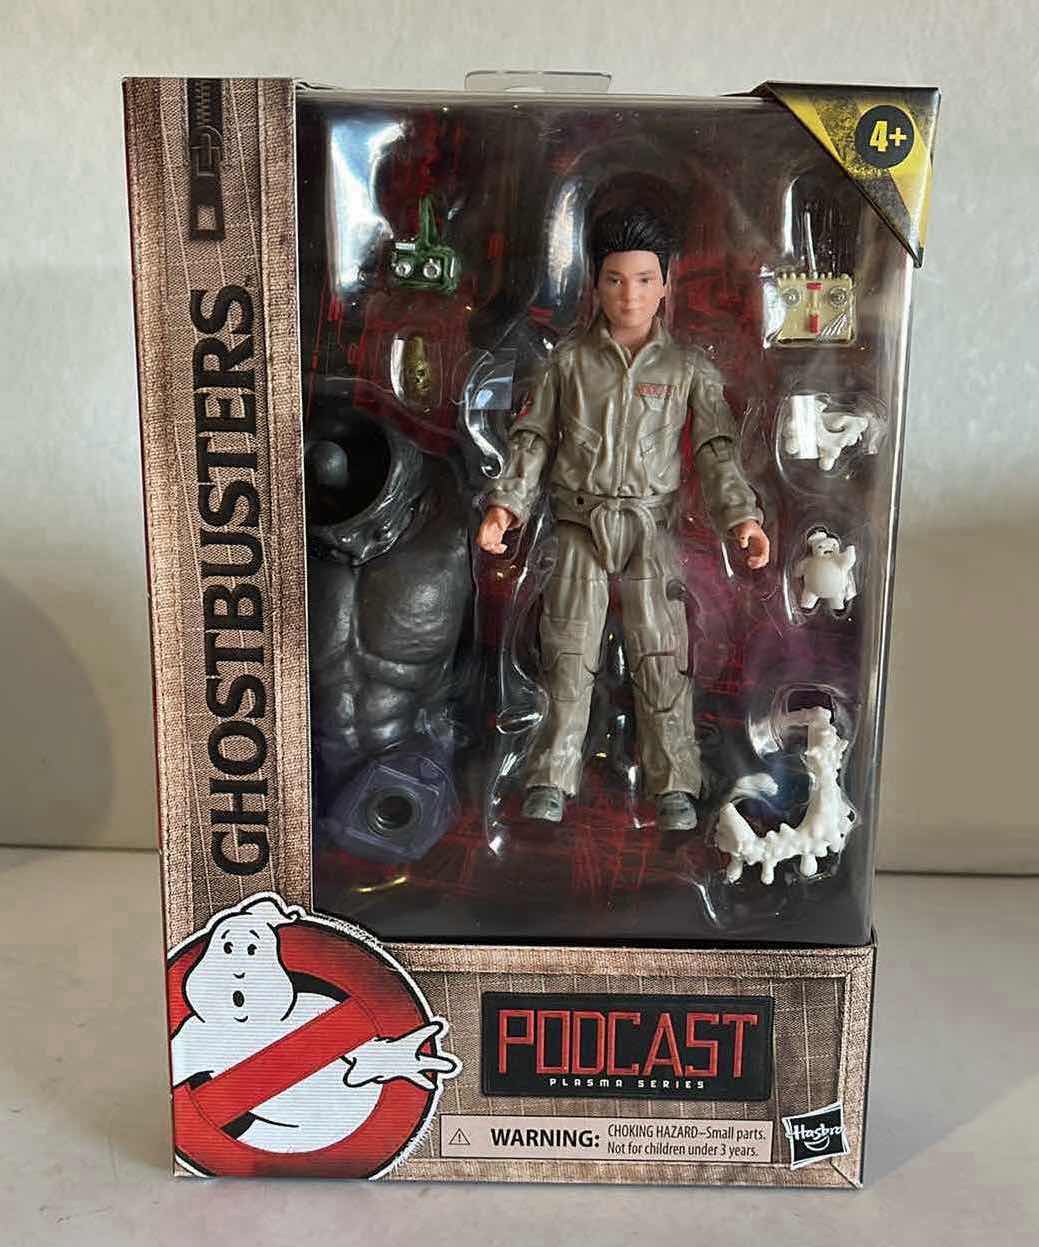 Photo 1 of NIB GHOSTBUSTERS PLASMA SERIES PODCAST COLLECTIBLE AFTER LIFE ACTION FIGURE - RETAIL PRICE- $25.99